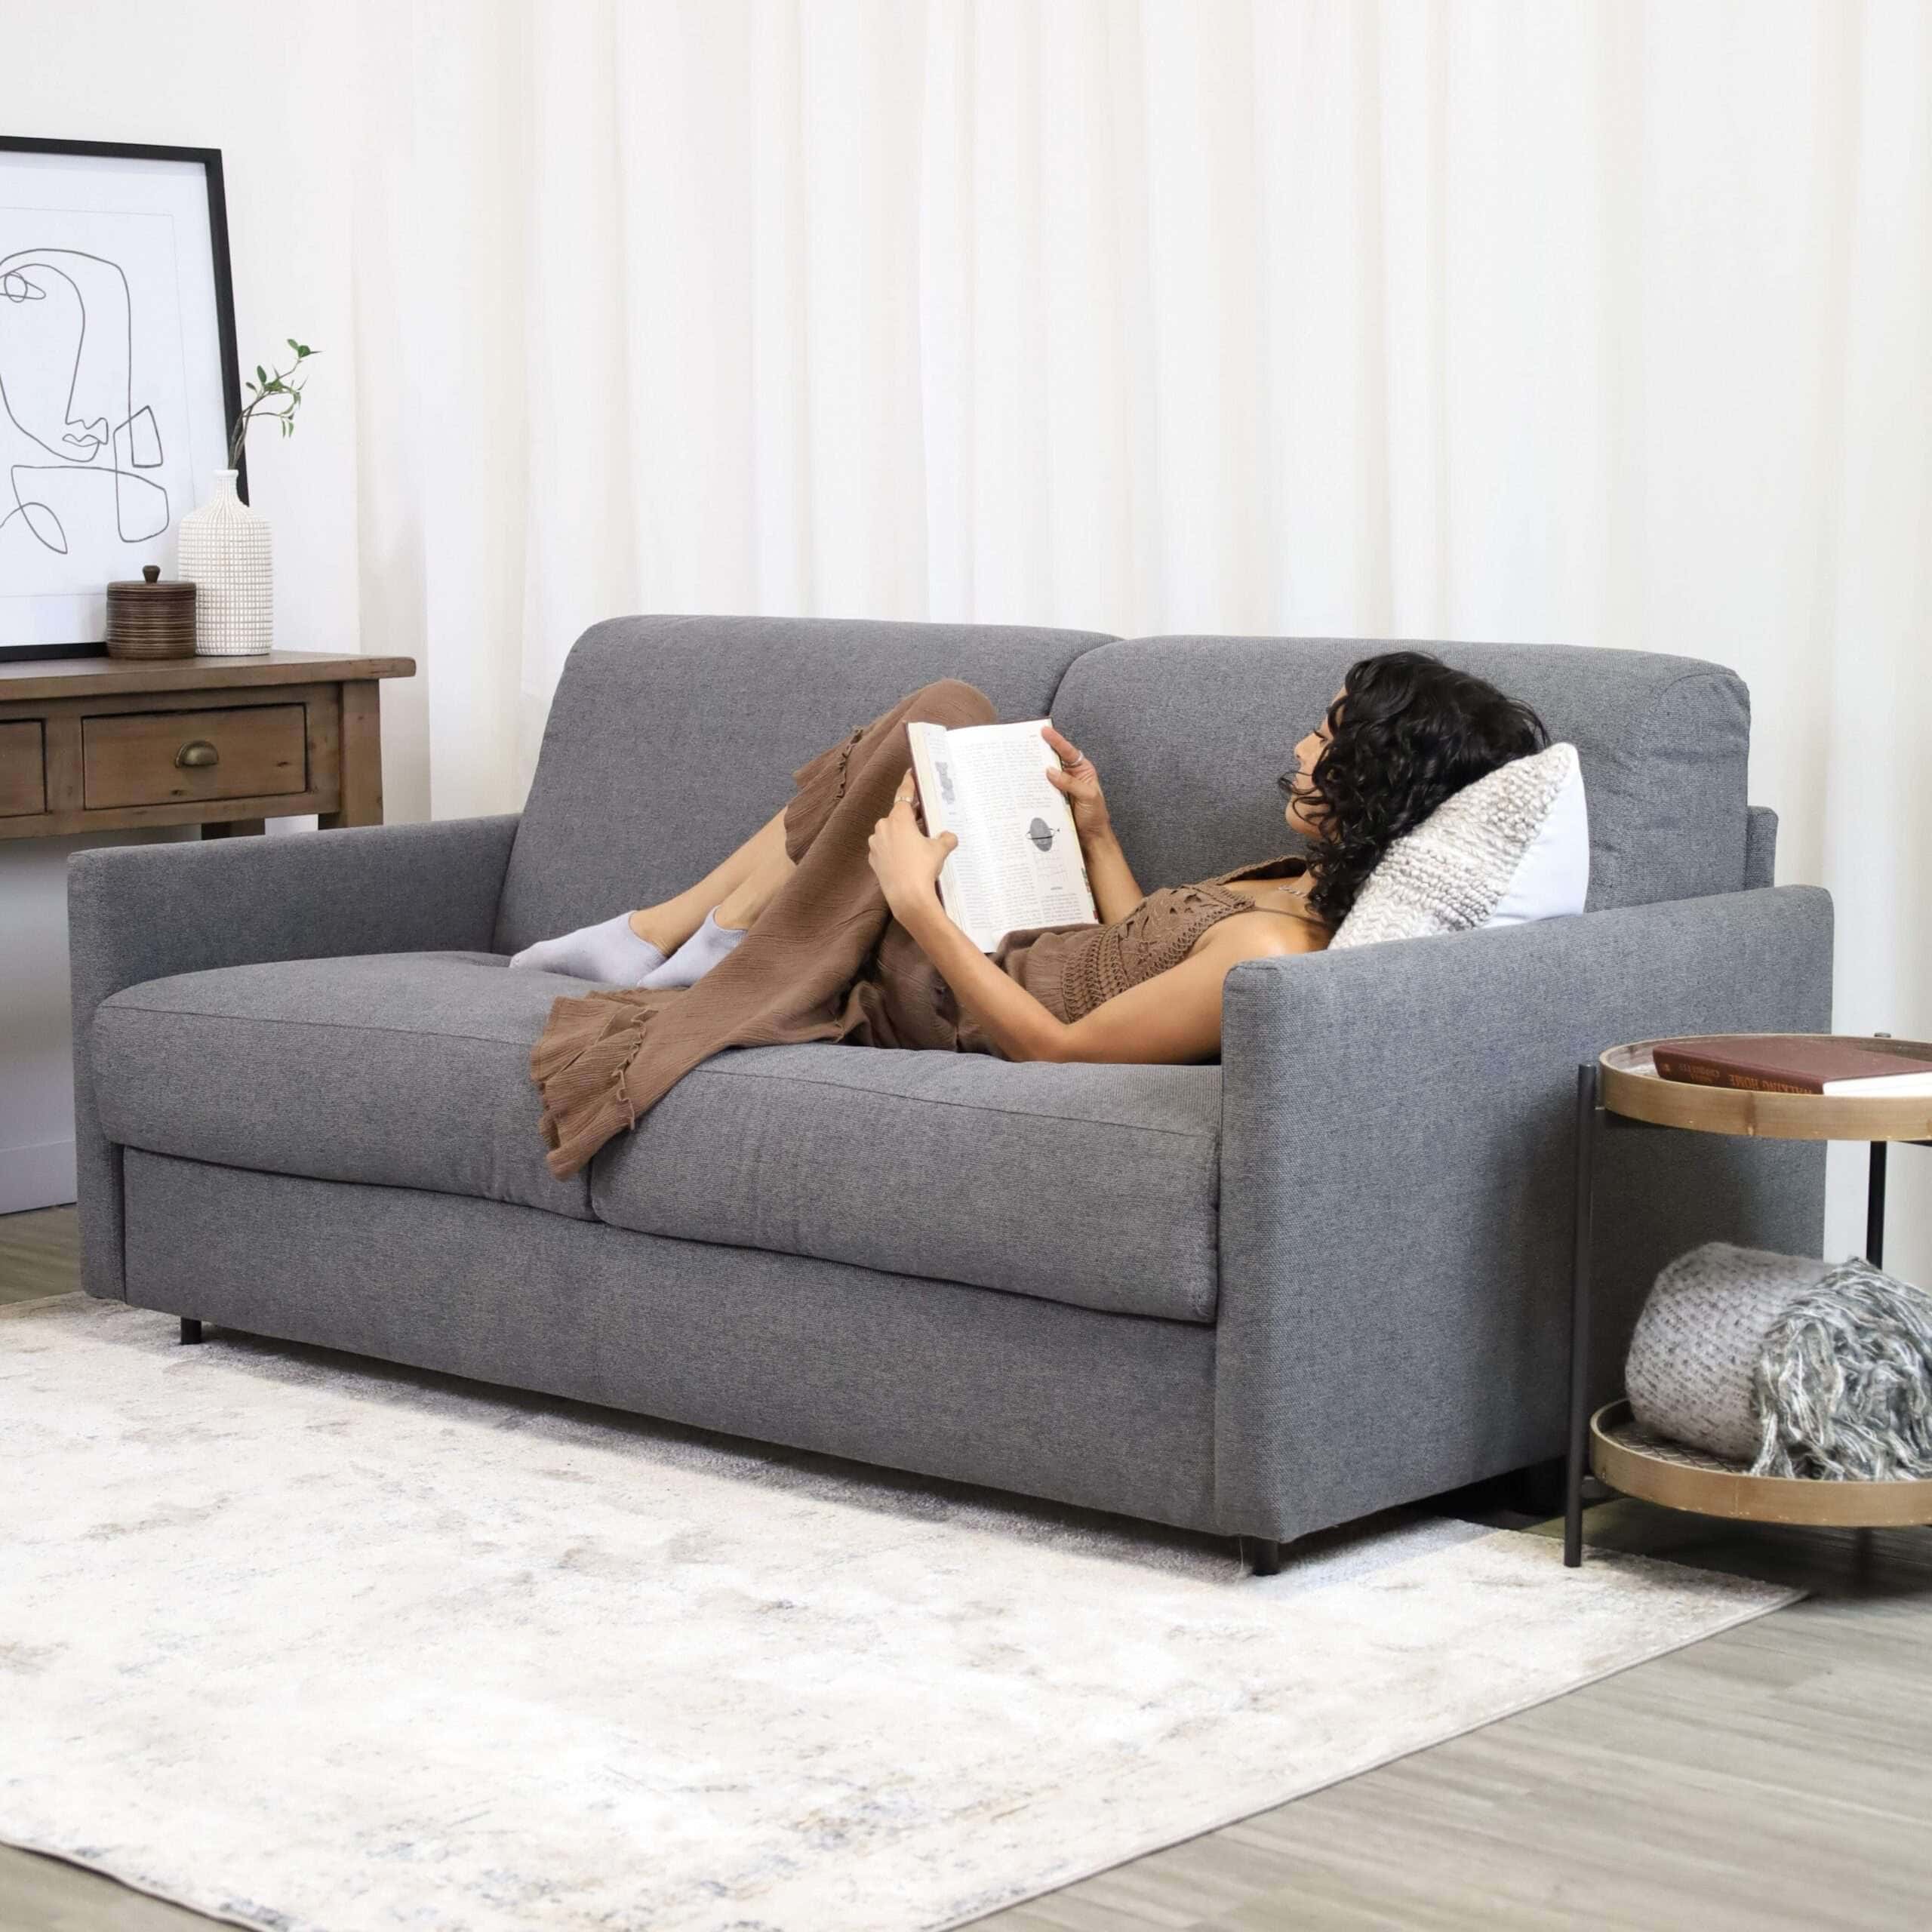 Woman reading on a pull out sofa bed